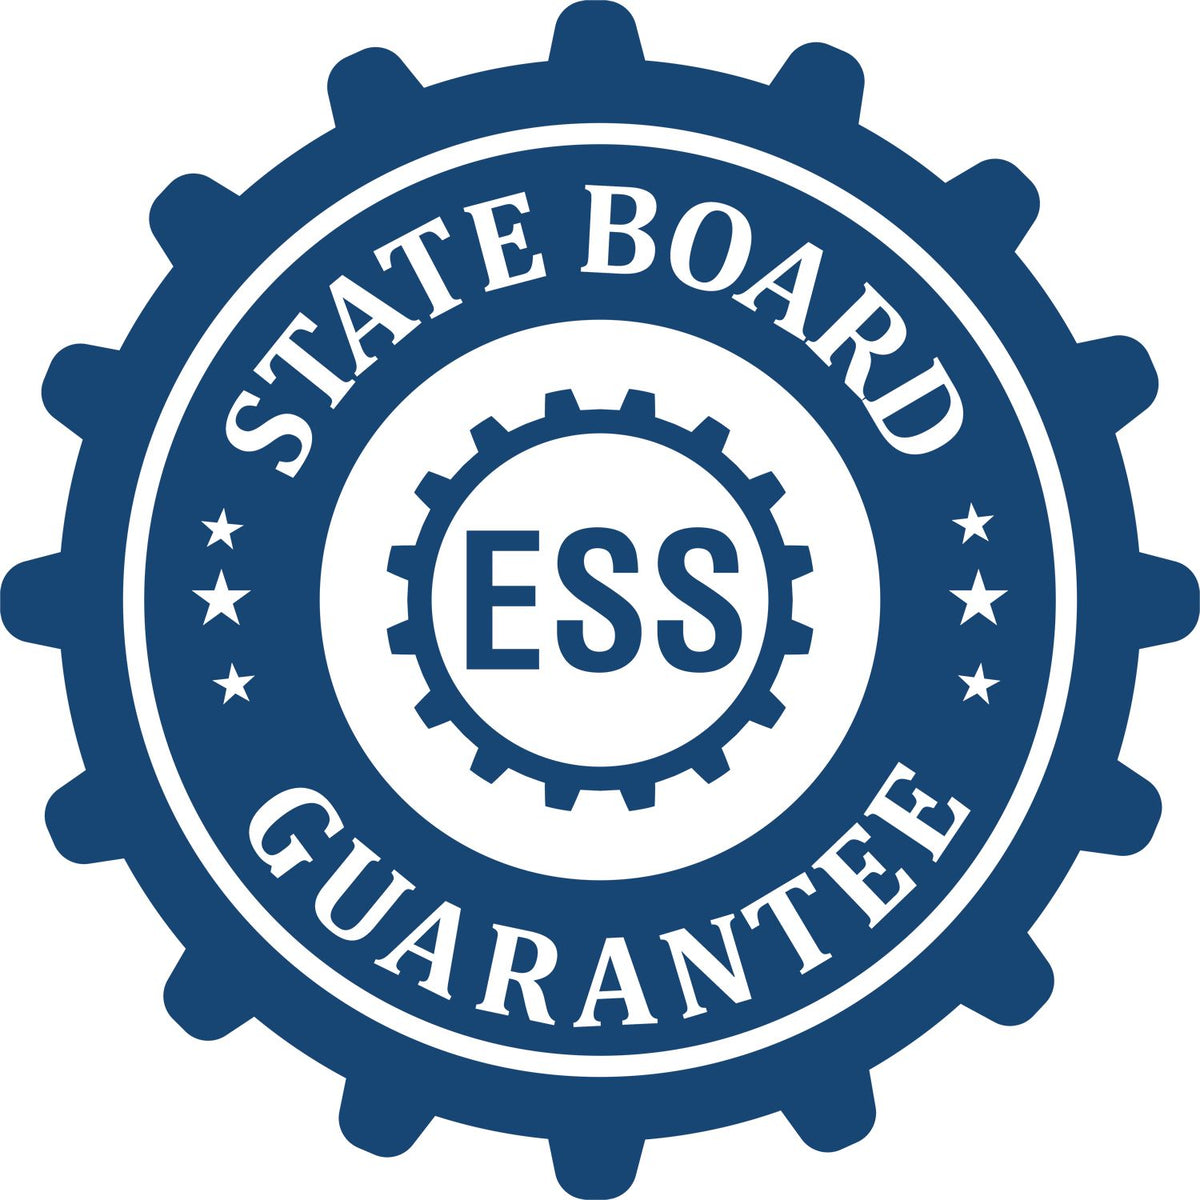 An emblem in a gear shape illustrating a state board guarantee for the Wooden Handle Louisiana State Seal Notary Public Stamp product.